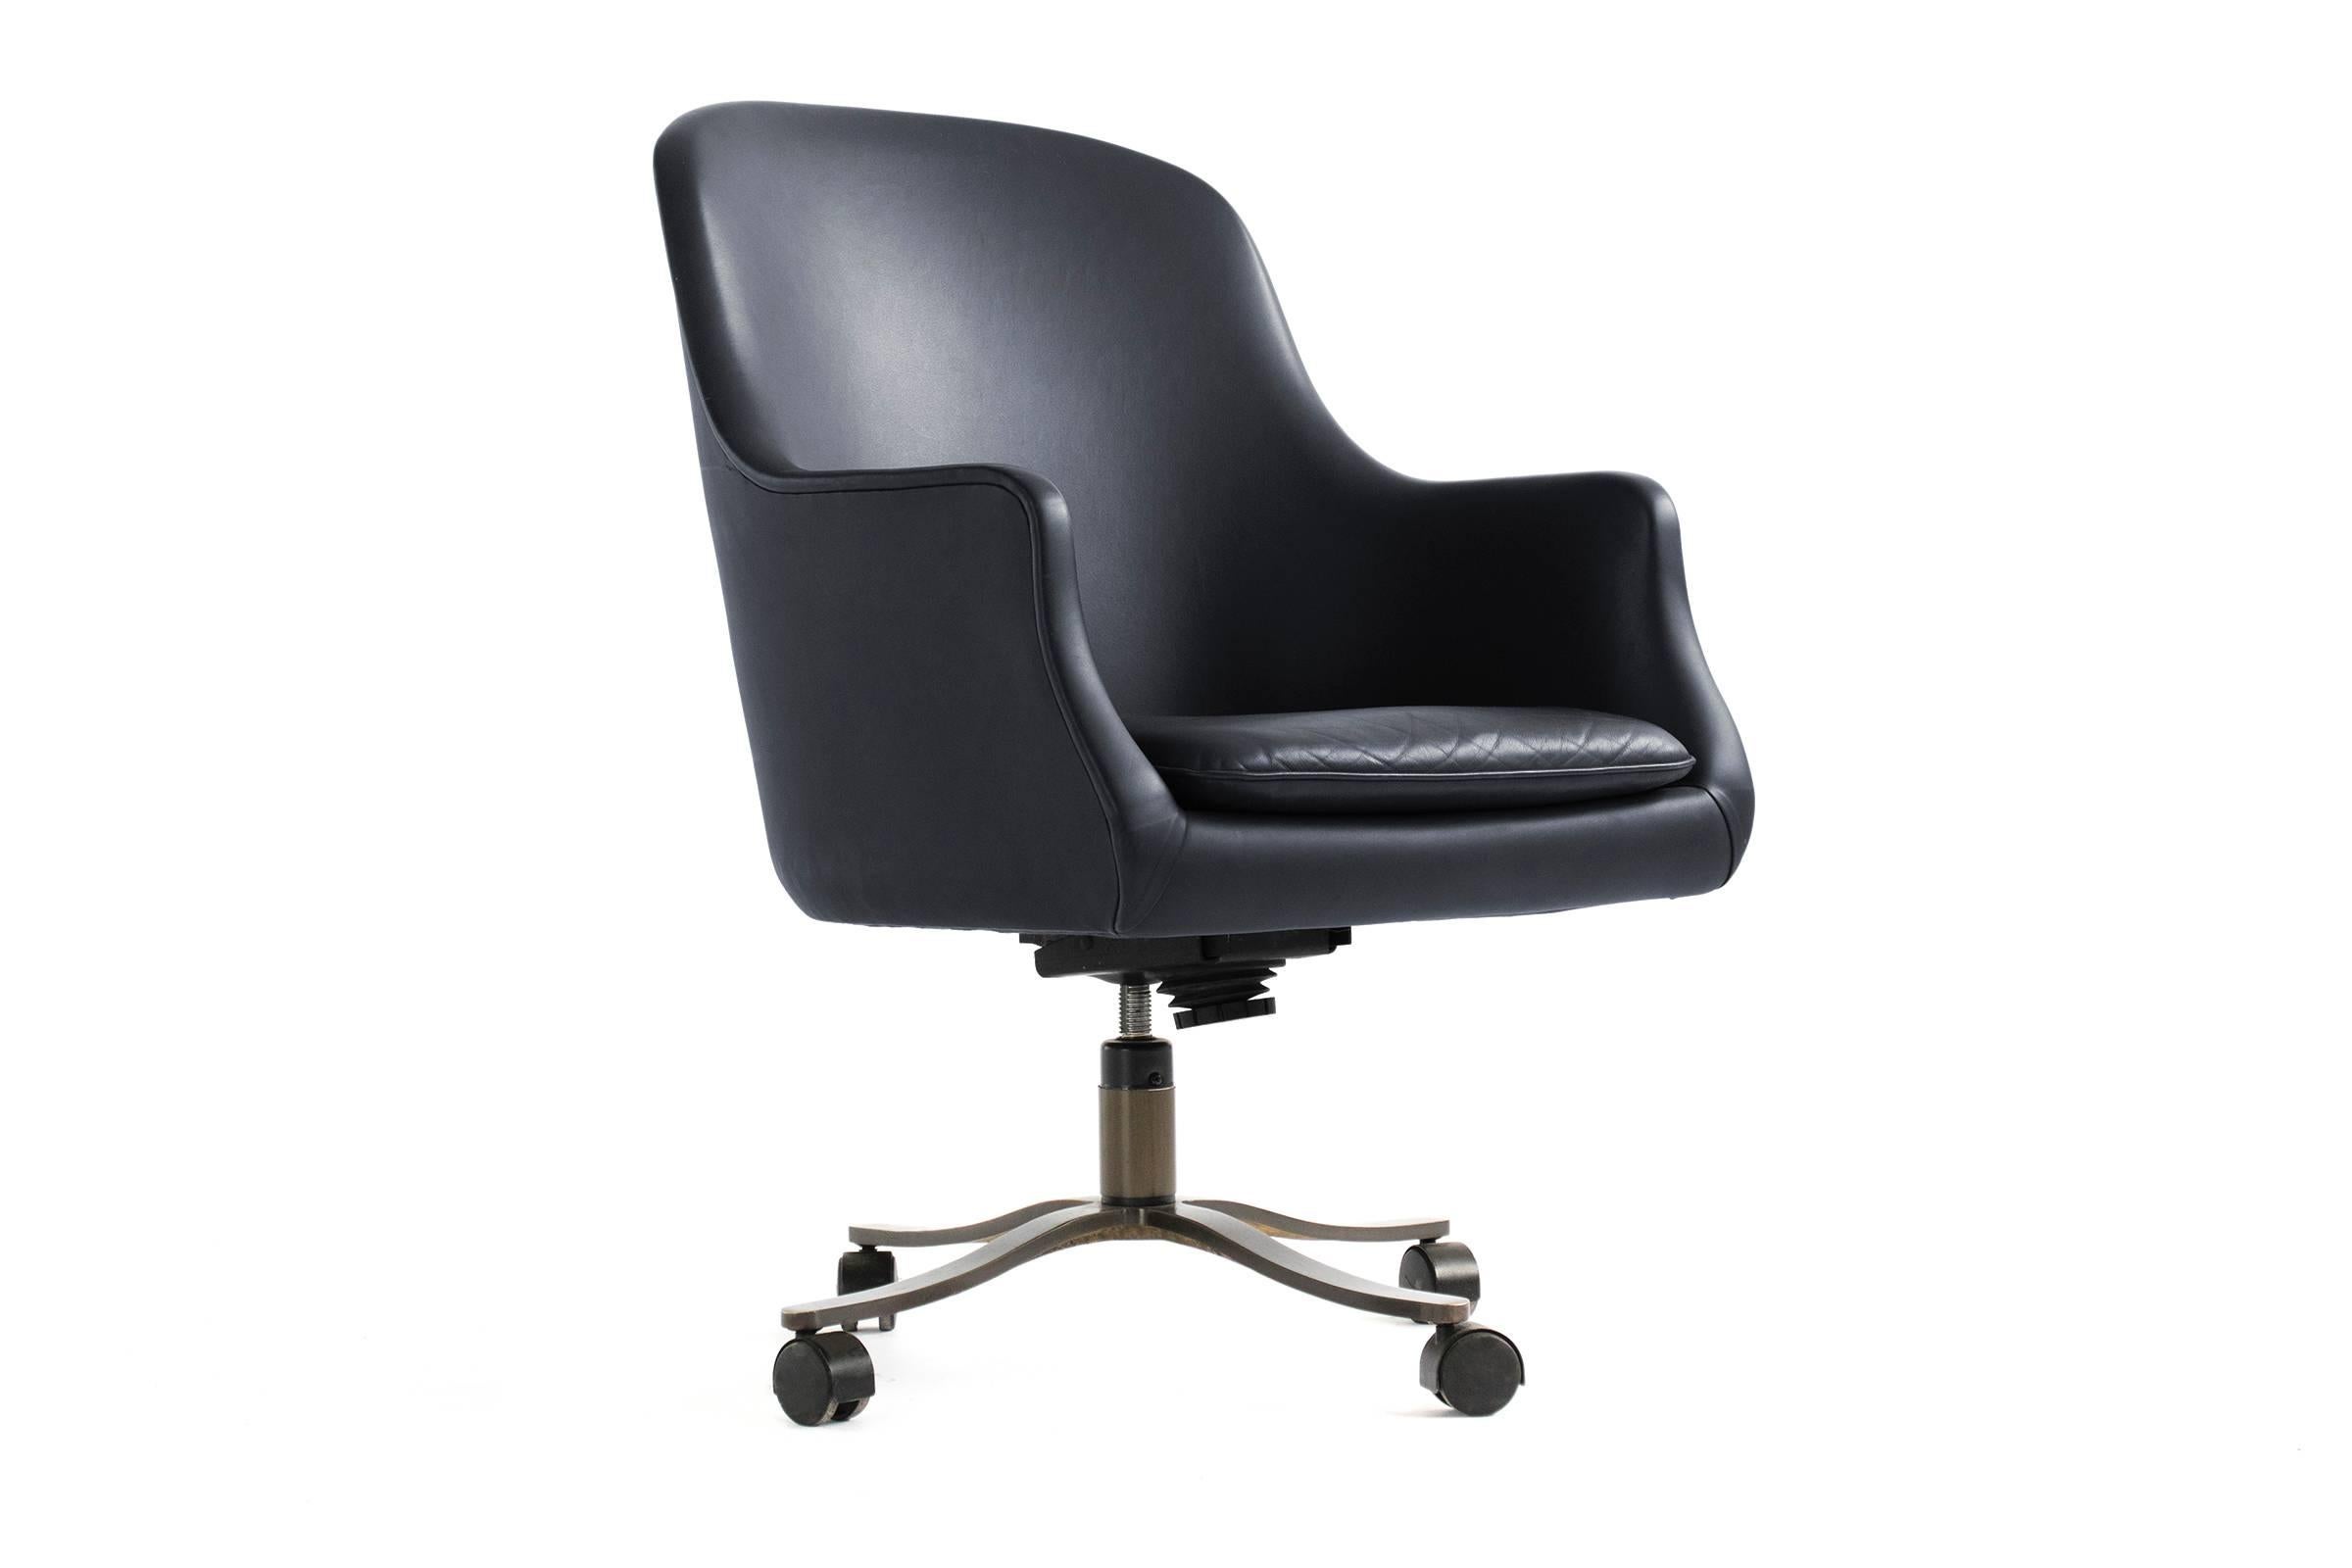 Upholstered navy leather desk chair. Dark bronze four-star base with casters. Adjustable height and tilt sensitivity.
More available.